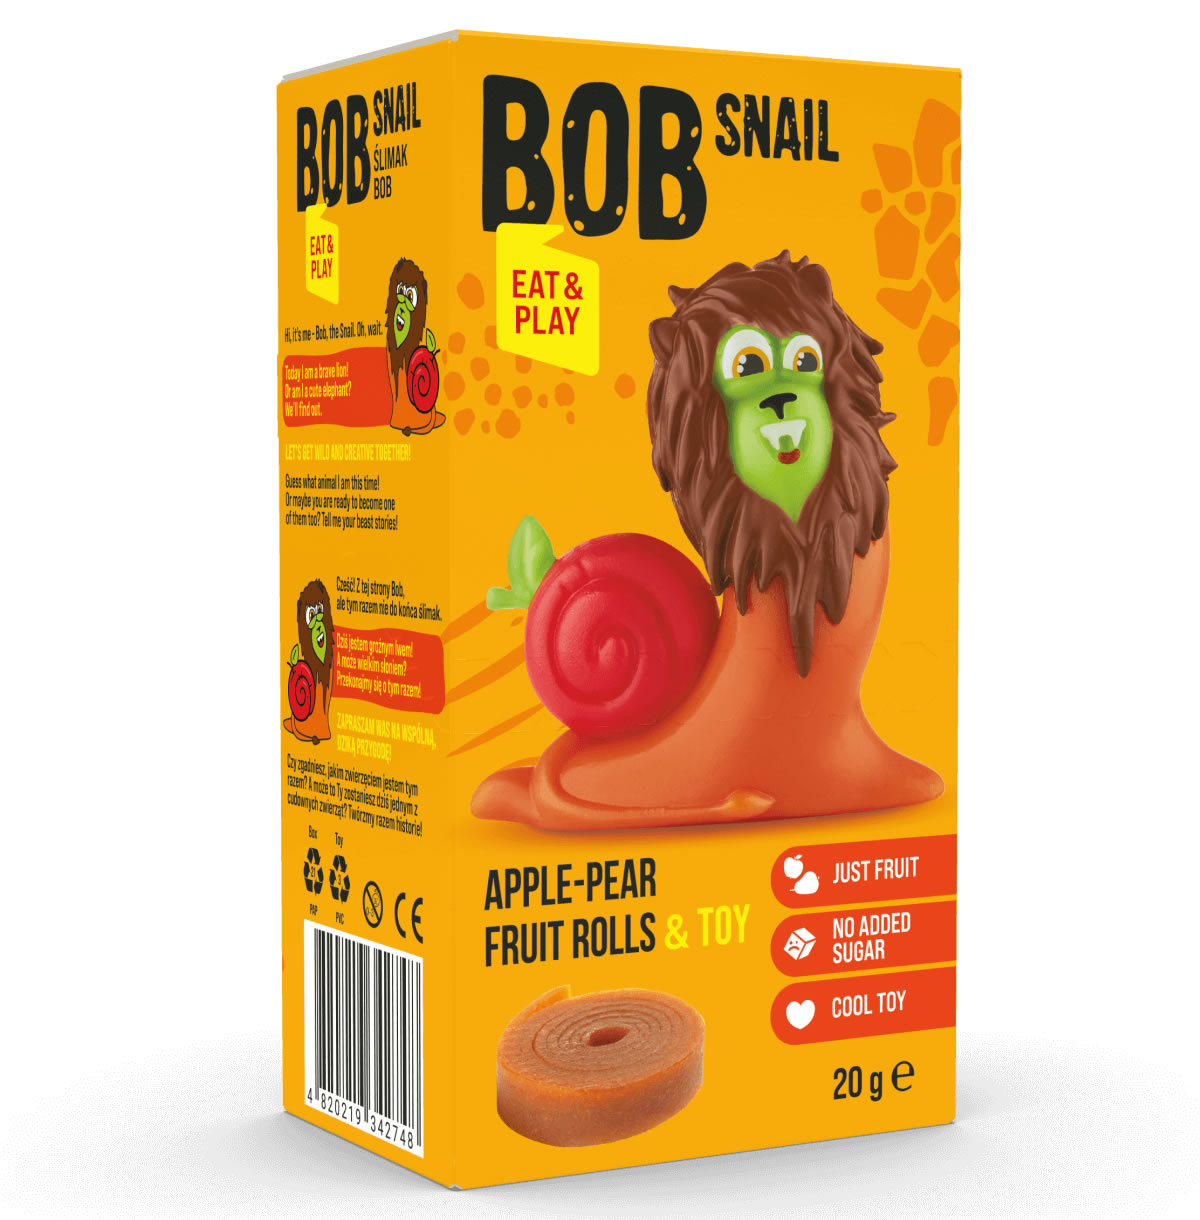 Bob Snail, Fruit Roll Apple Pear Snack with Toy, 20g